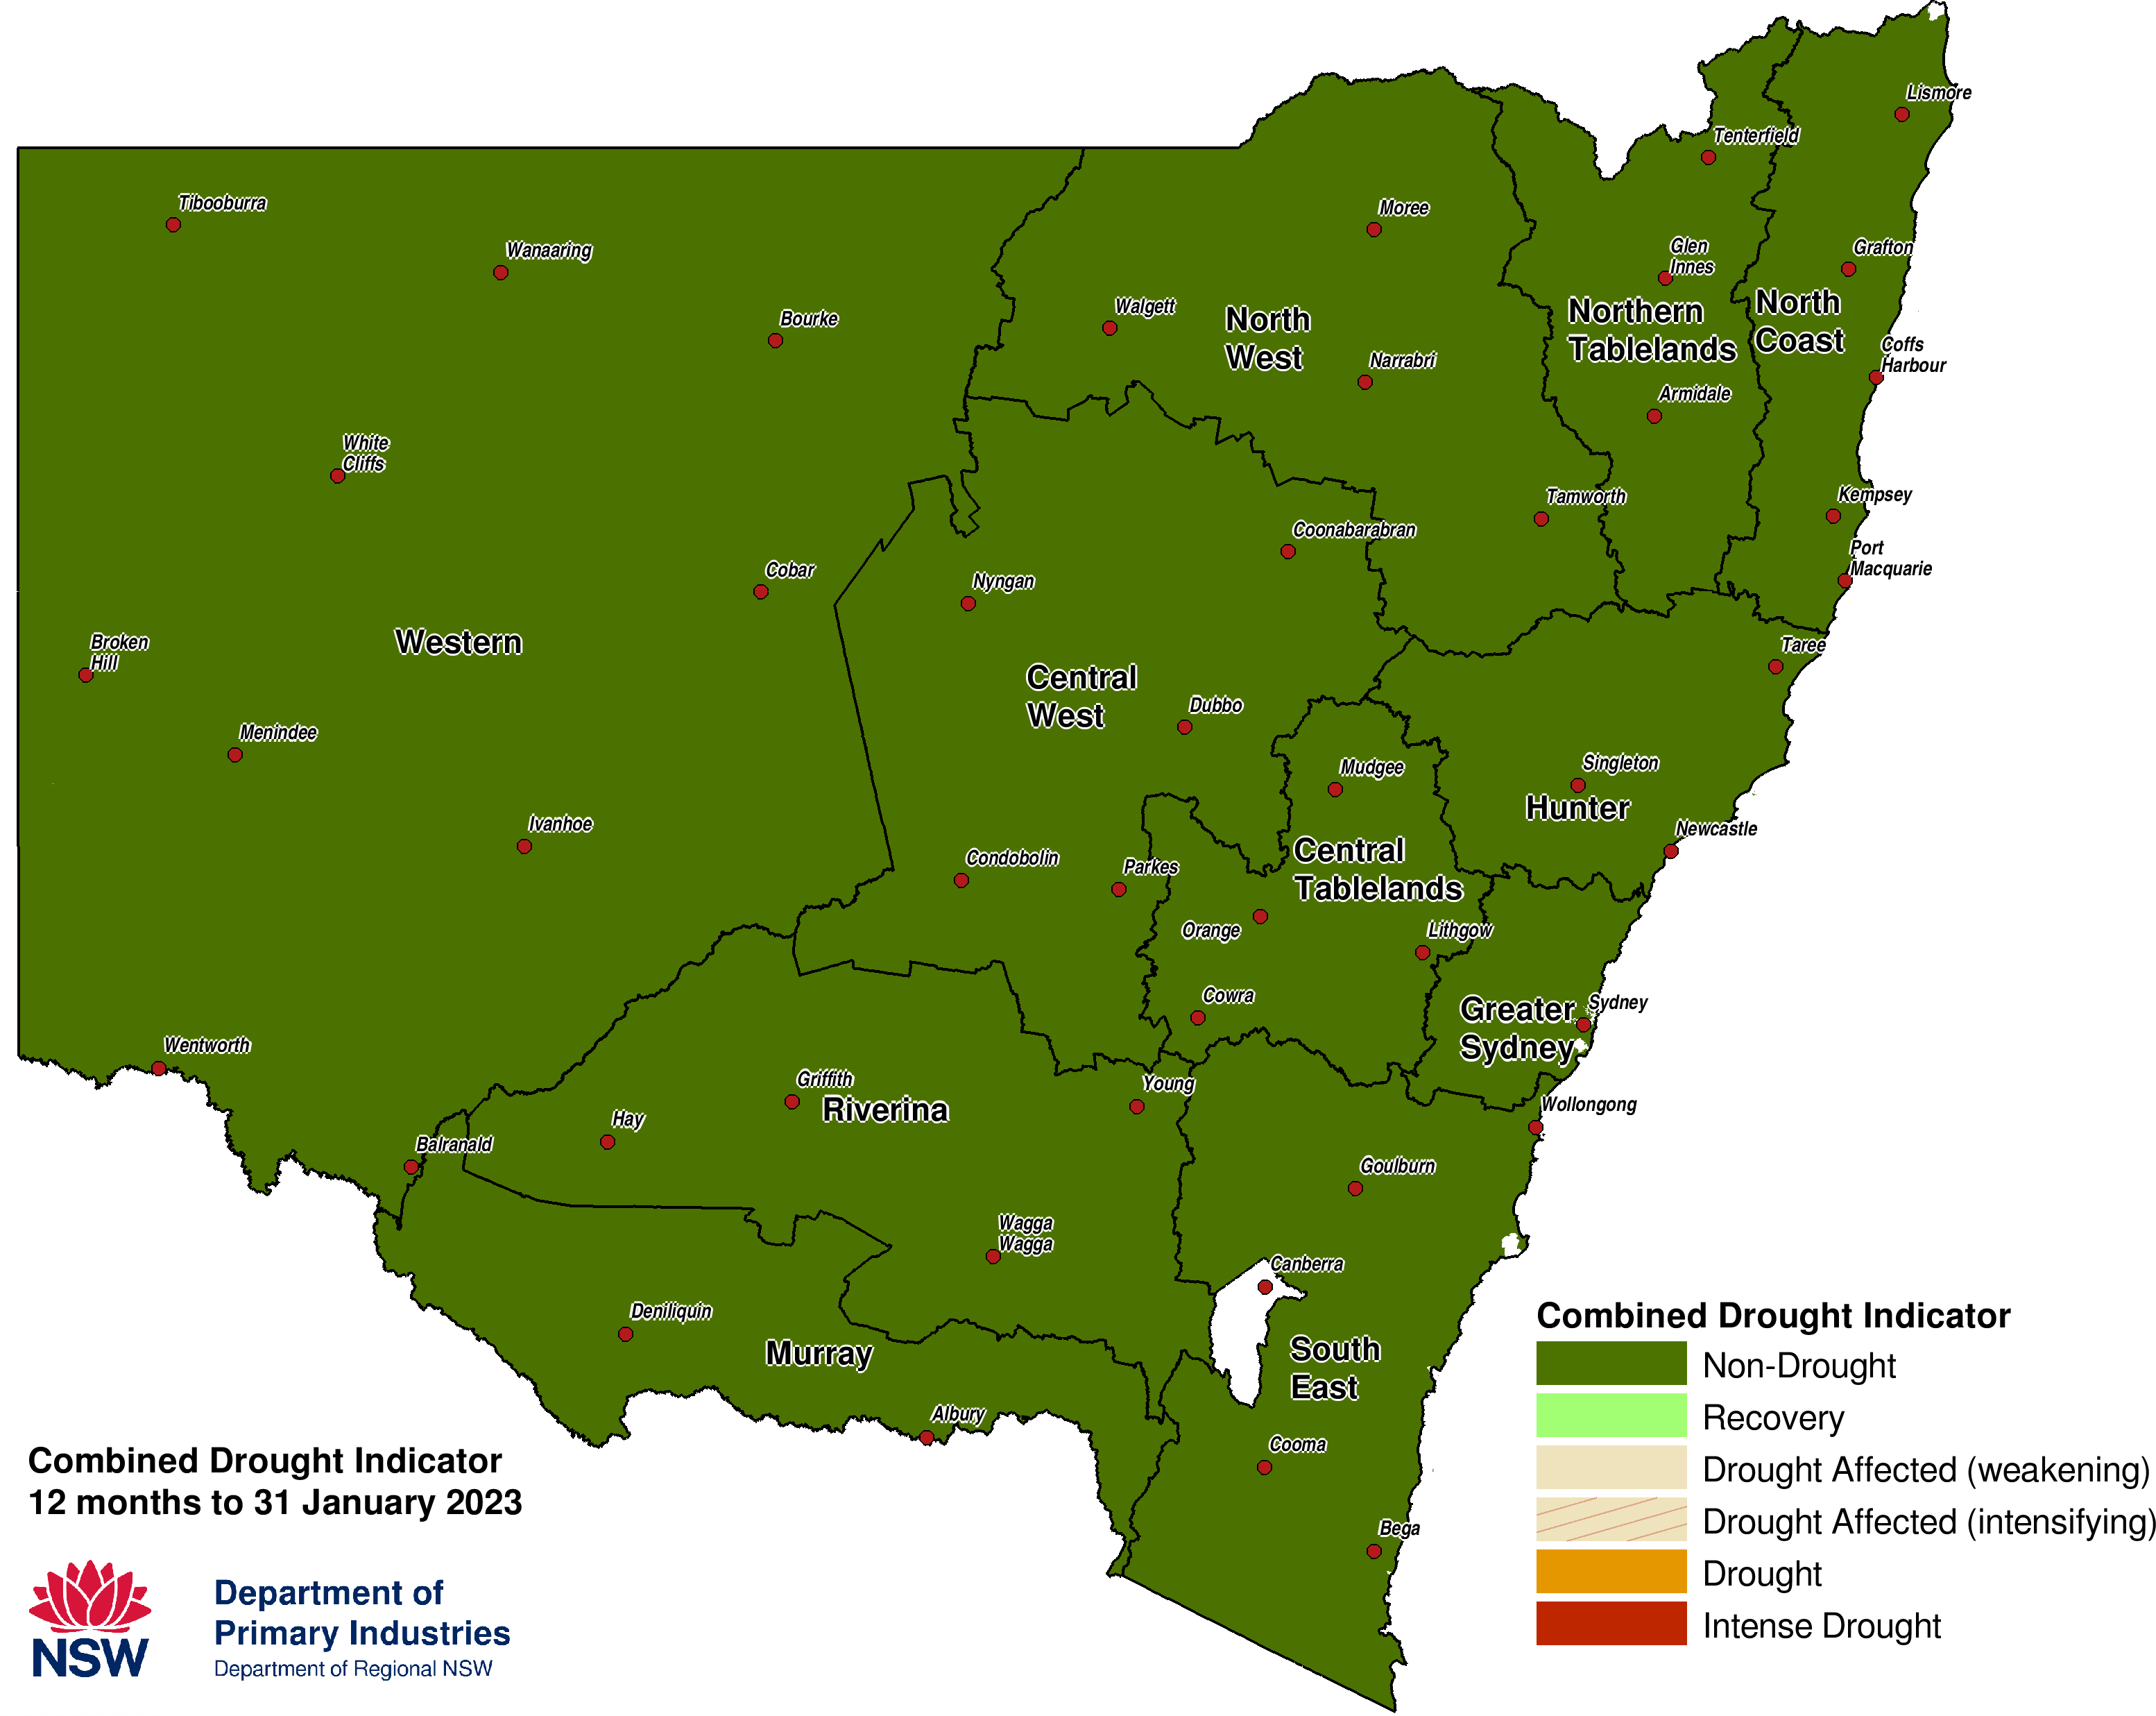 Figure 1. Verified NSW Combined Drought Indicator to 31 January 2023